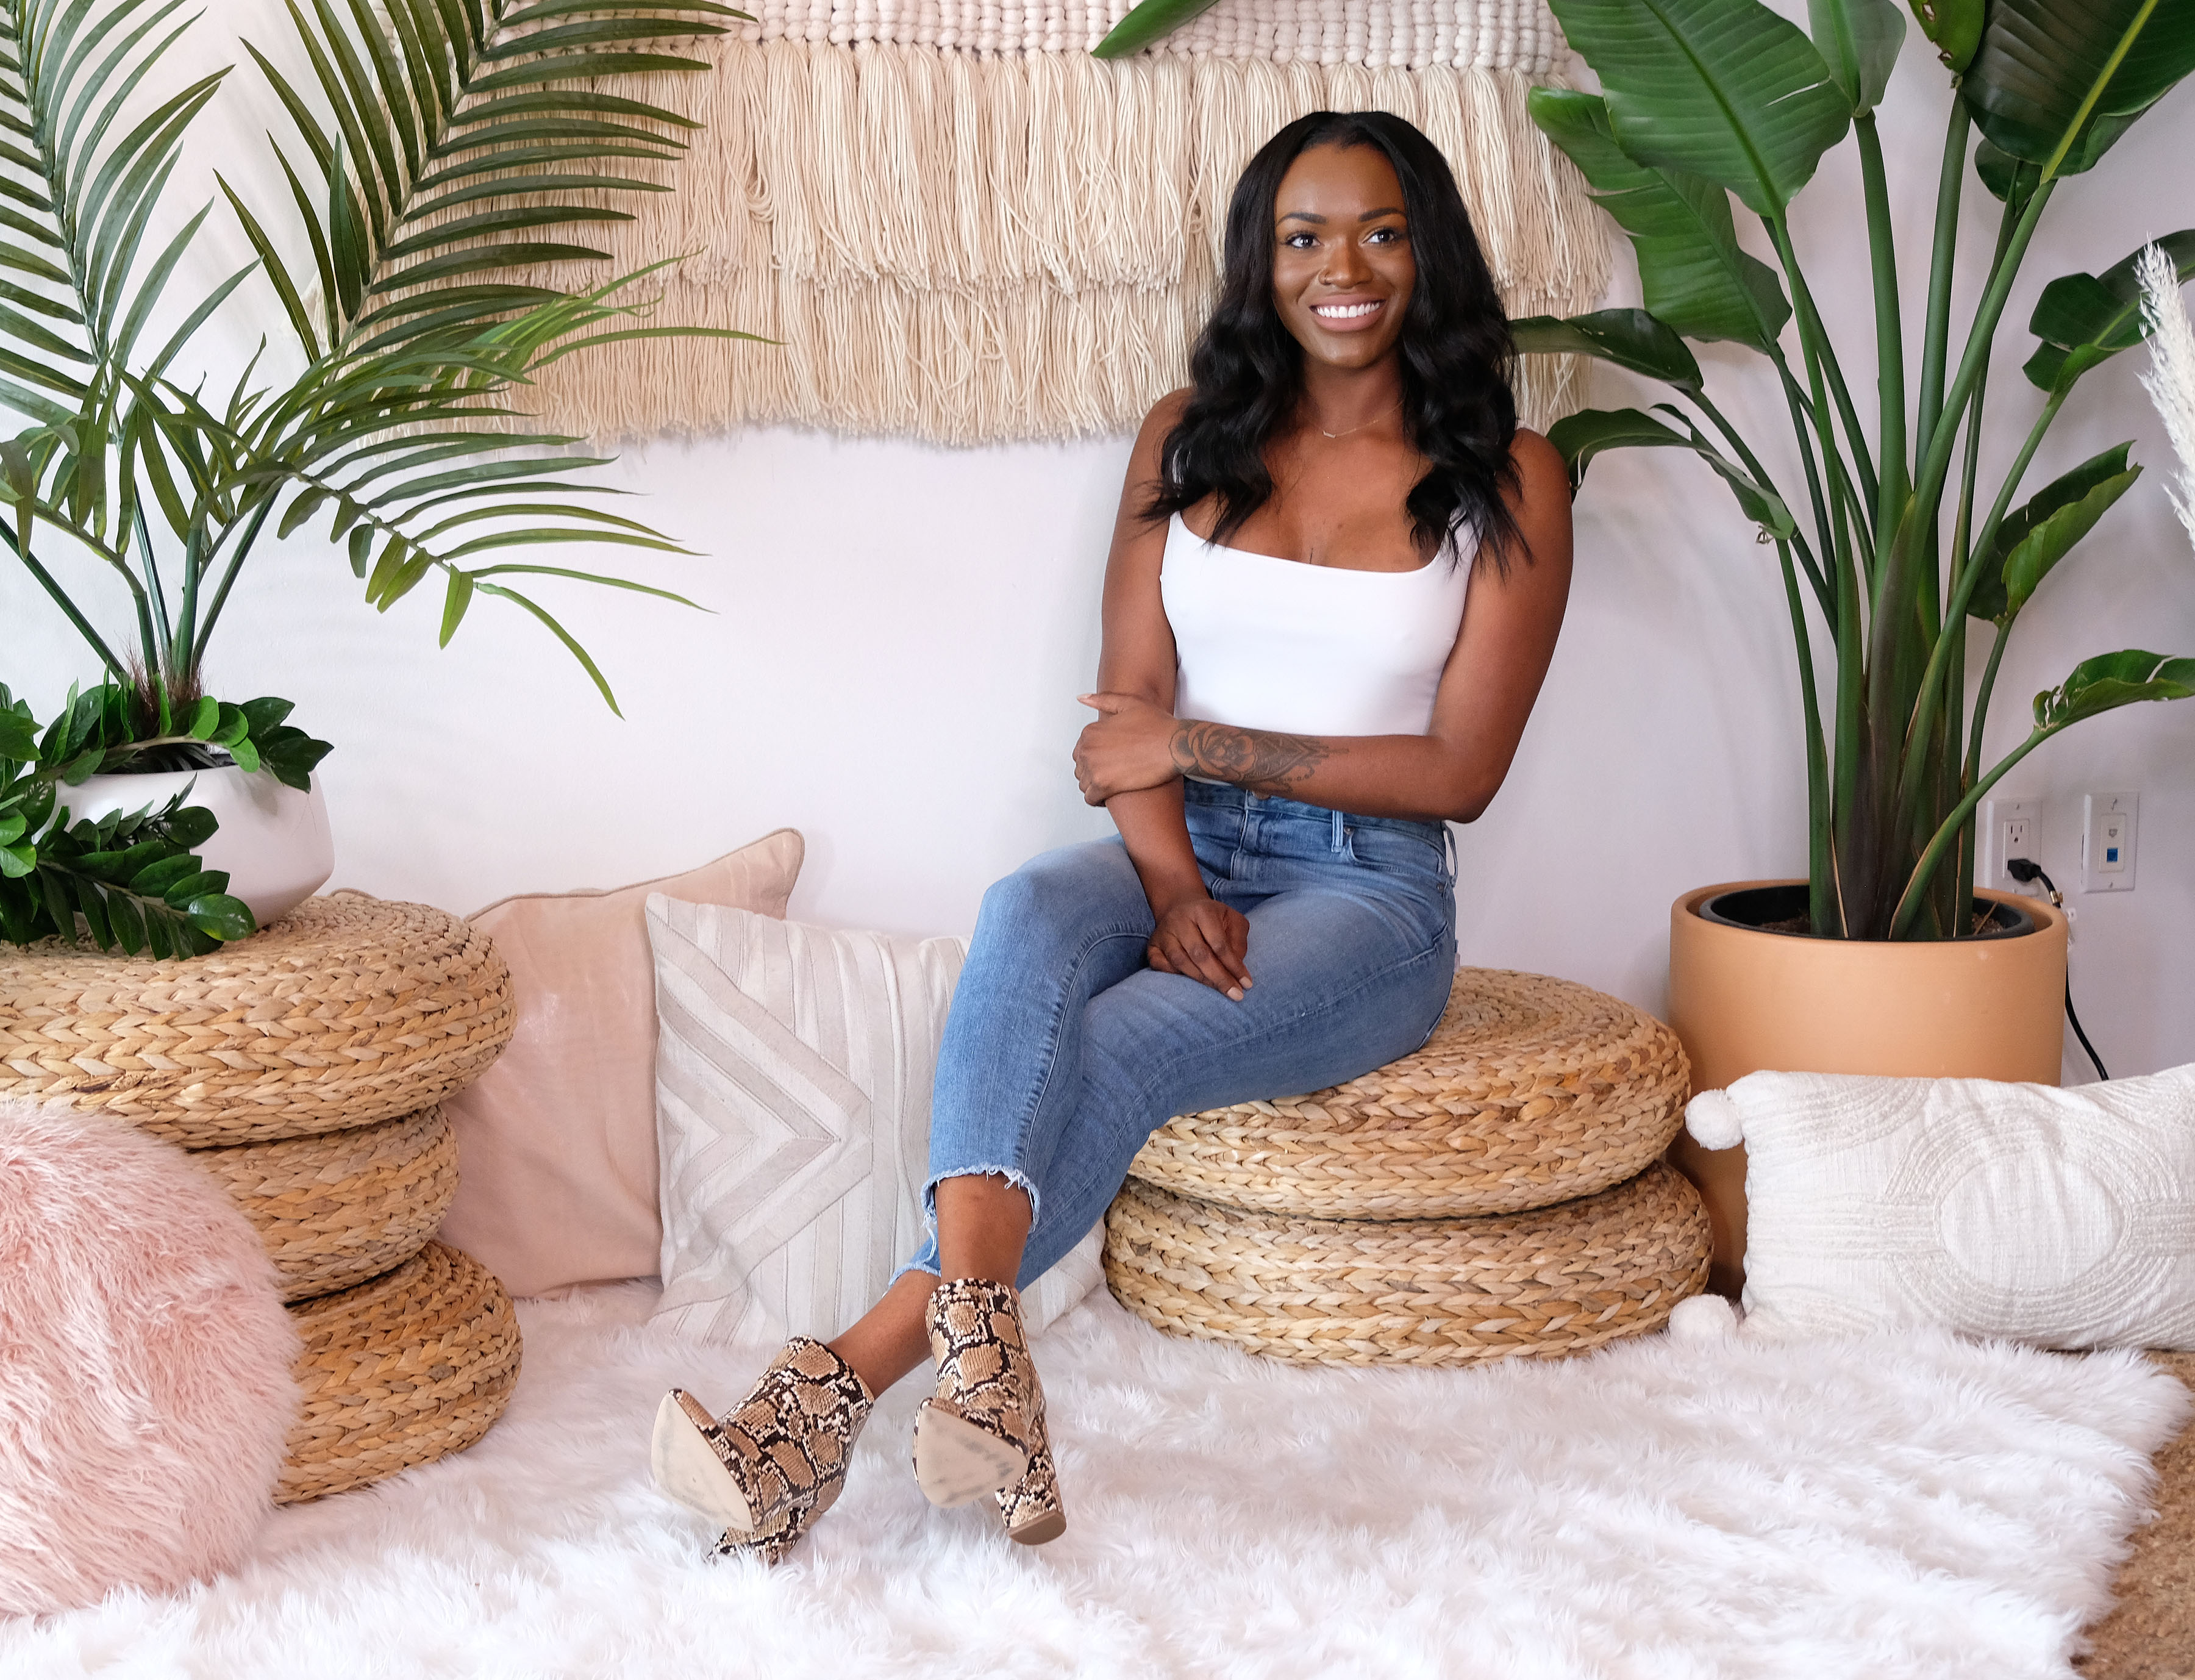 Tahzuan Hawkins is Criticised by Fans for Returning to "Bachelor in Paradise." Zach Shallcross Also Denies Her Request